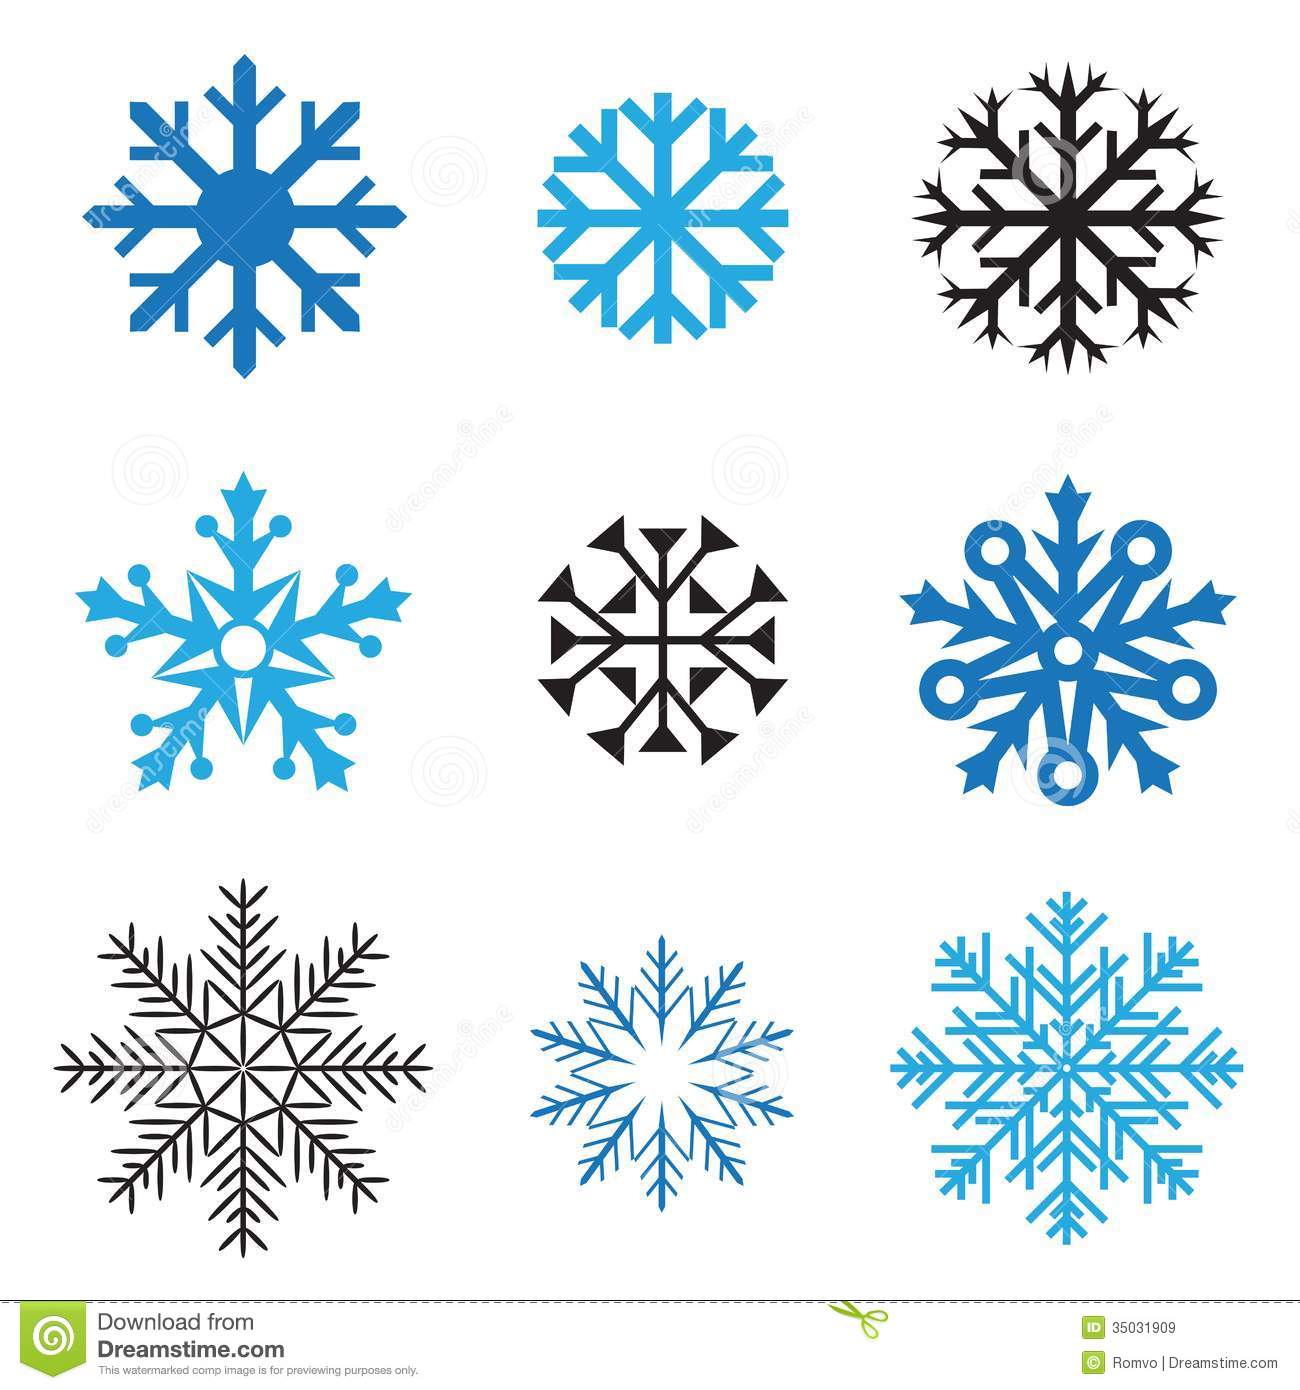 Different Snowflakes Royalty Free Stock Images   Image  35031909